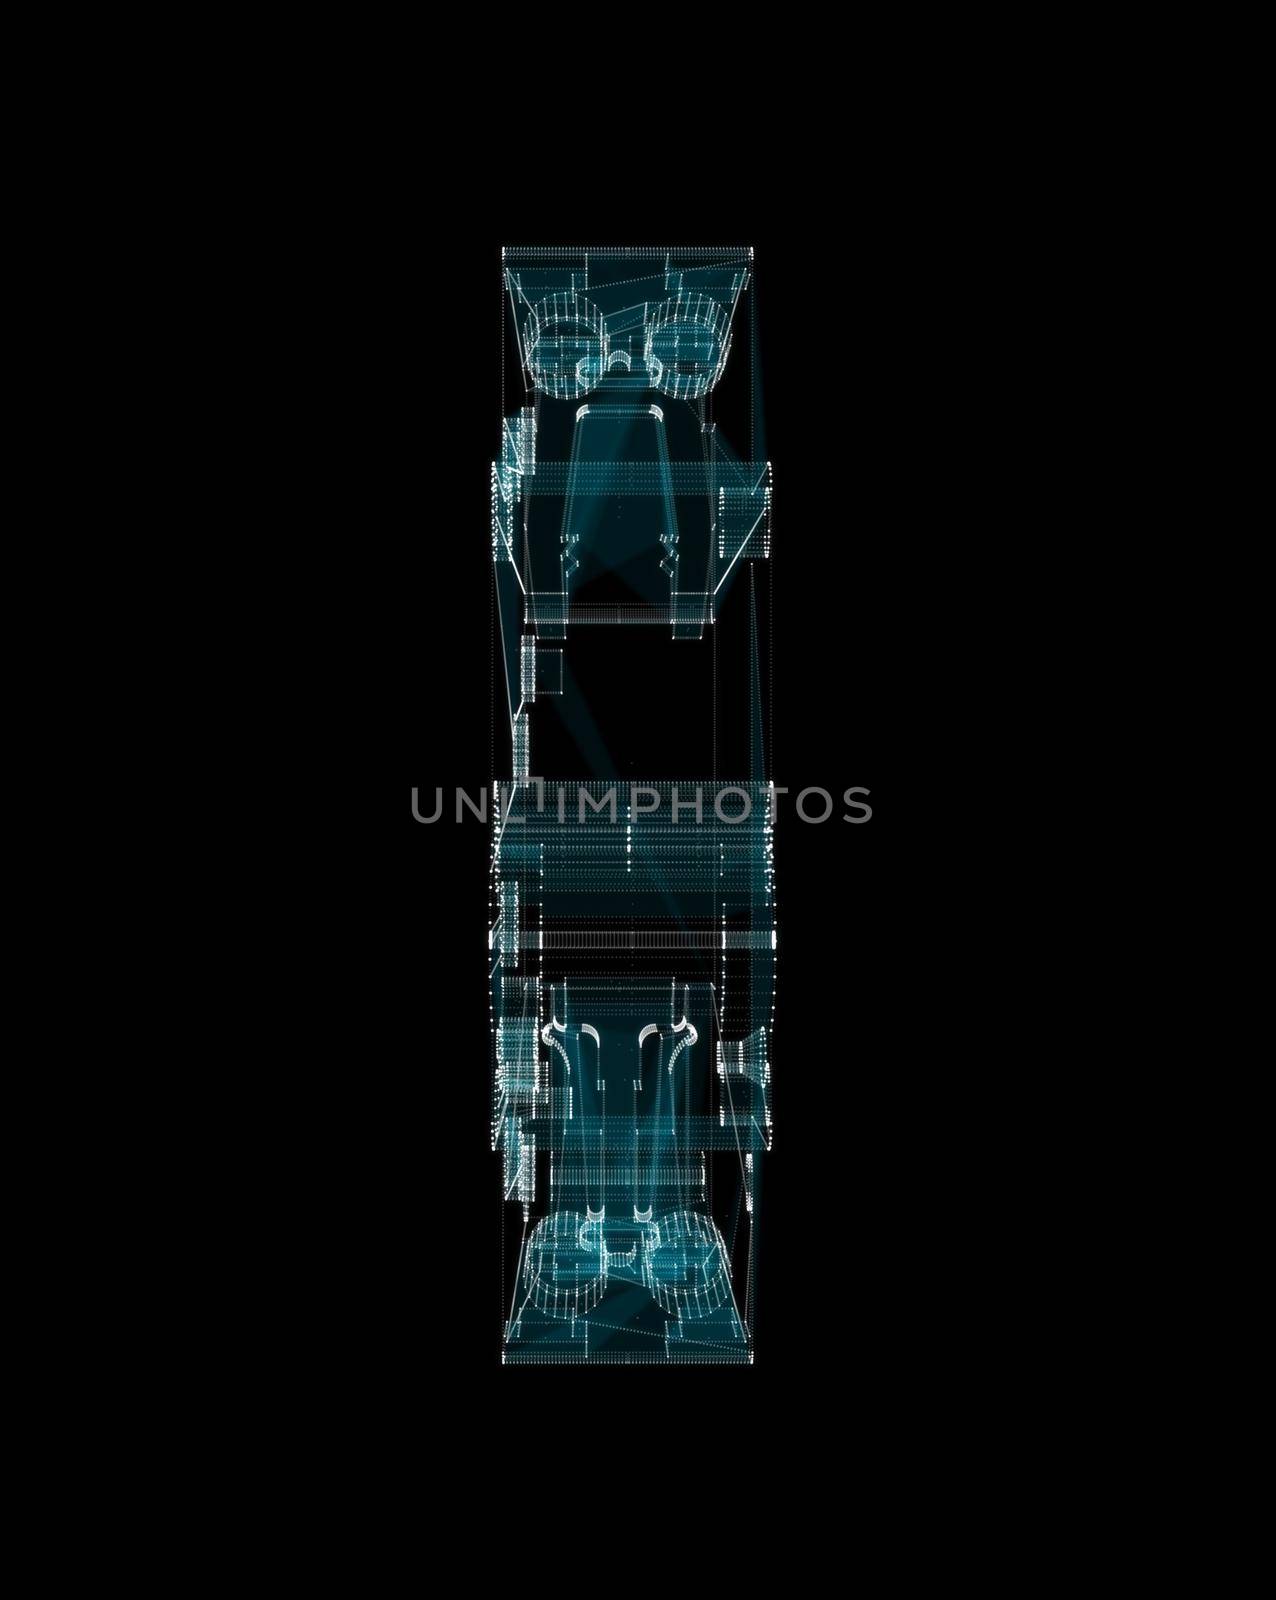 Differential circuit breaker Hologram. Industrial and Technology Concept by cherezoff